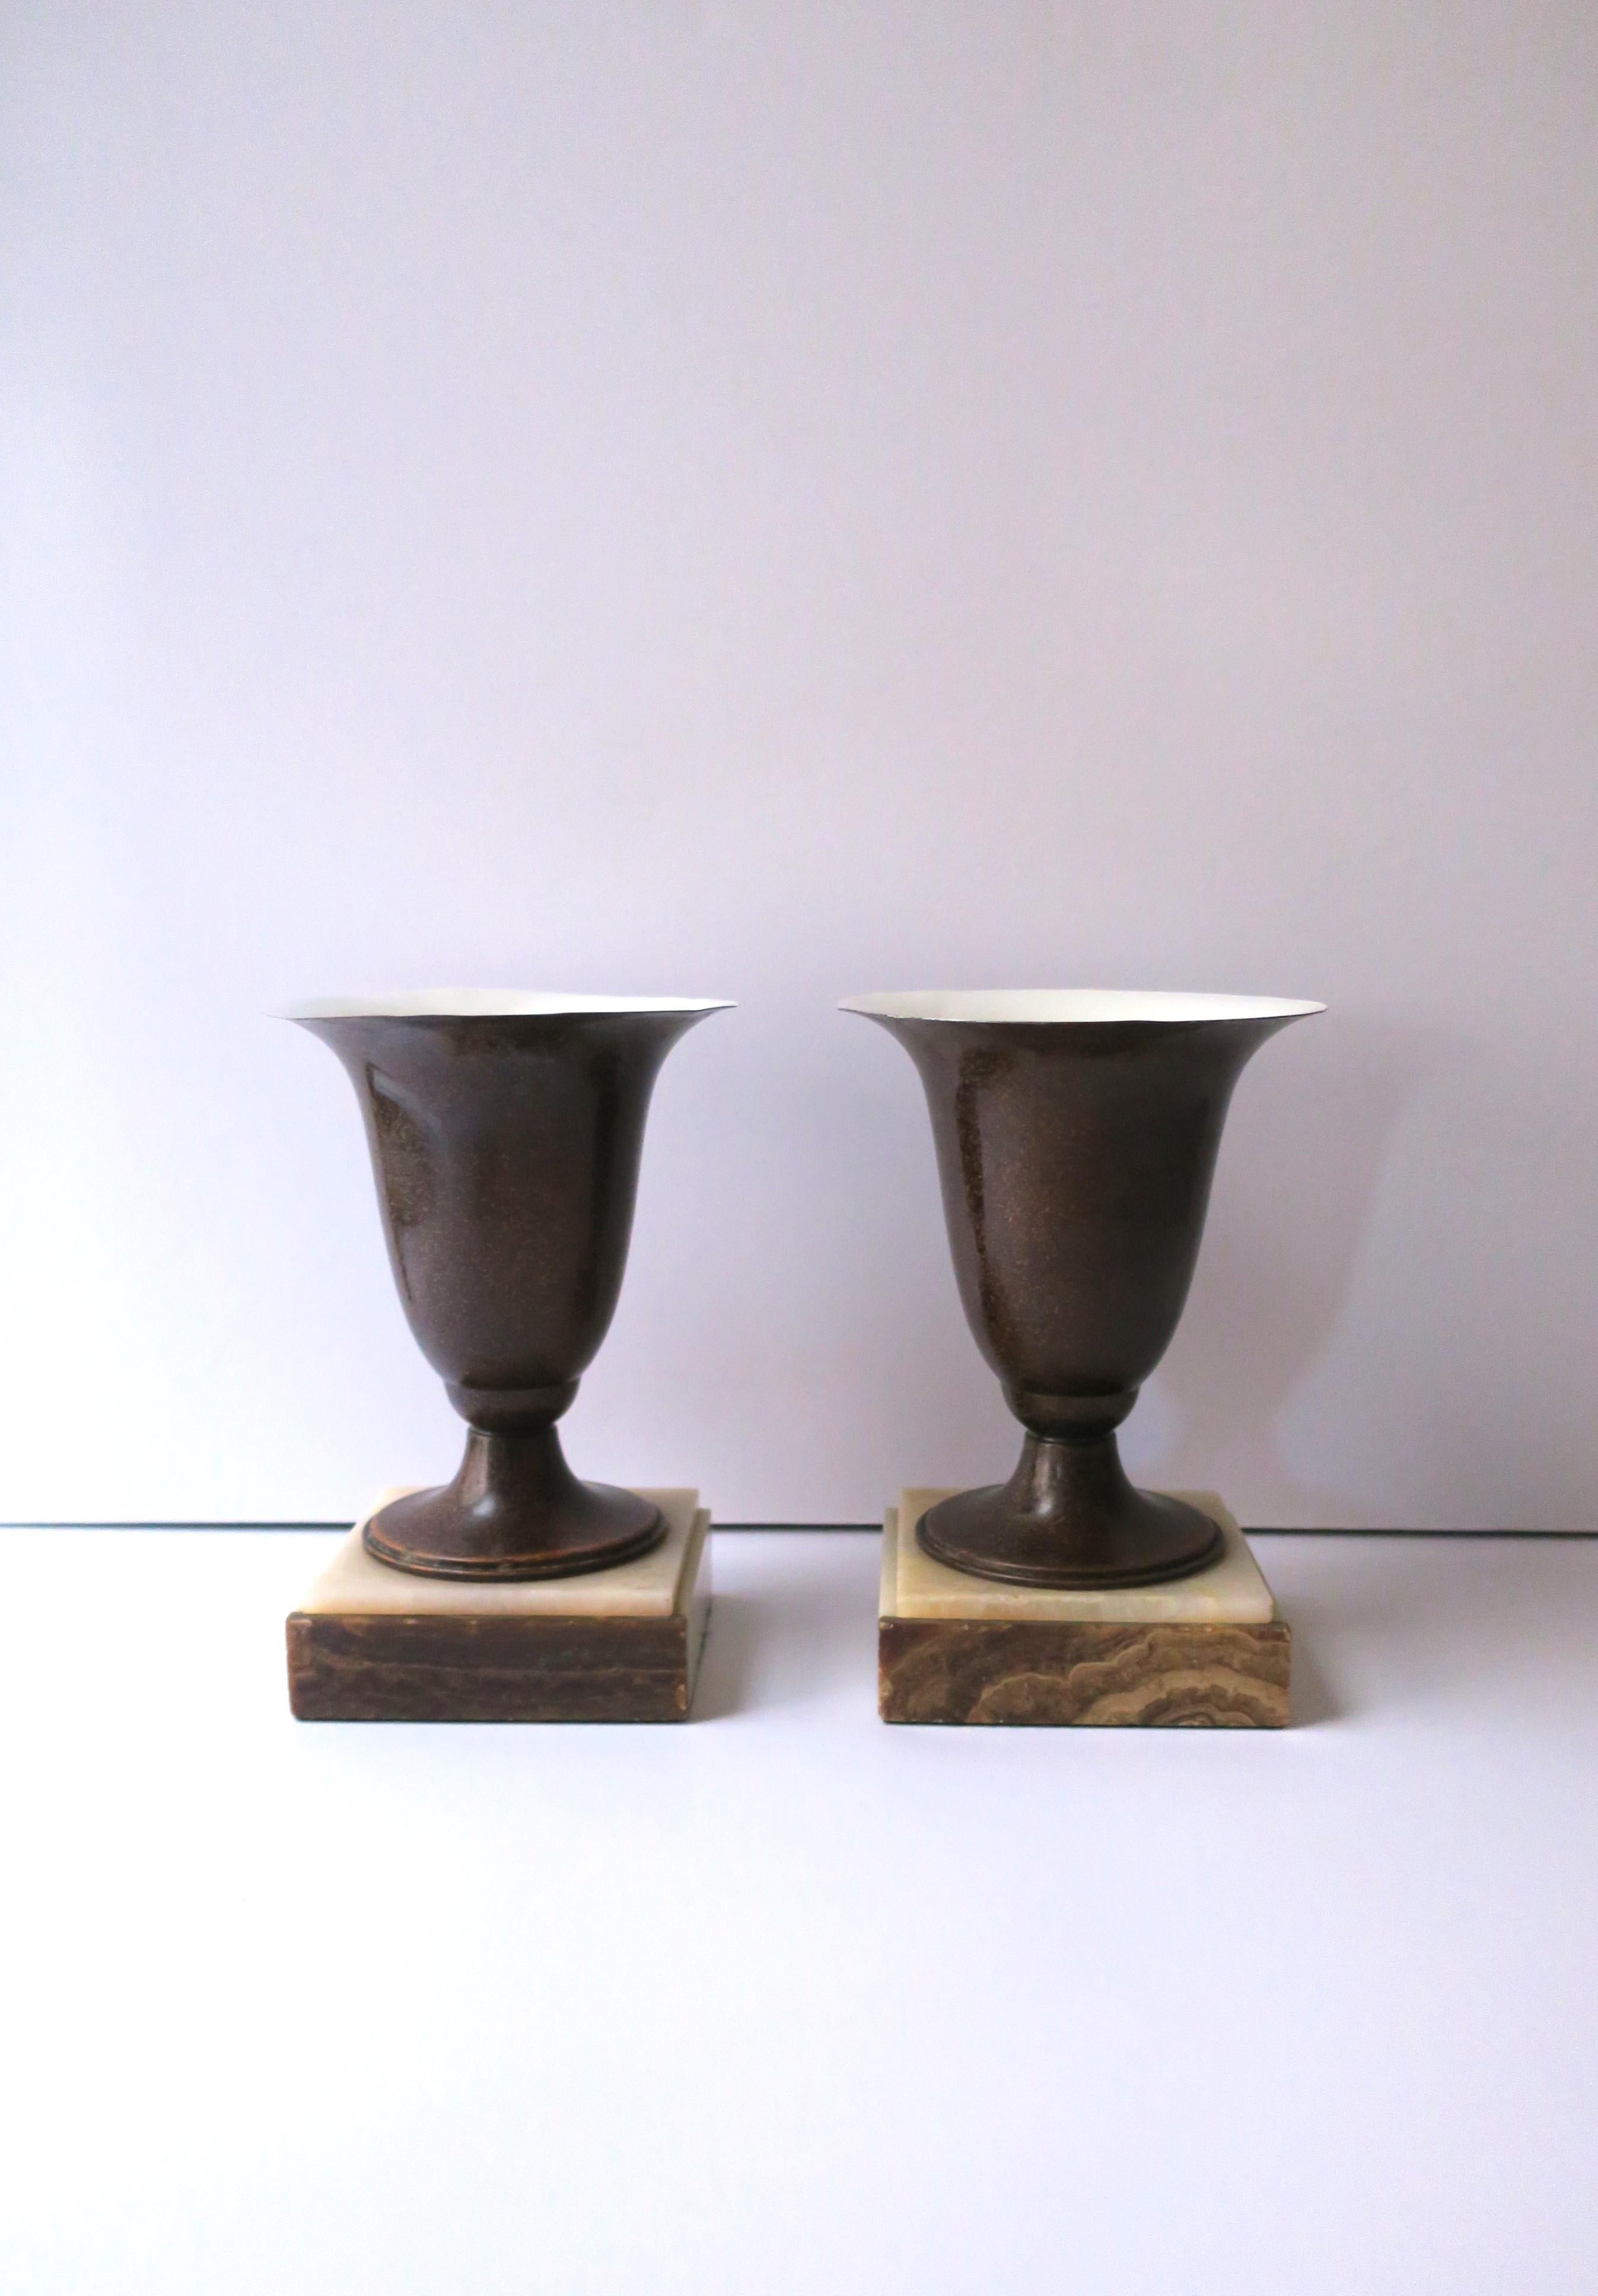 A pair of enamel and onyx marble urn form table lamps of the Art Deco period, circa early-20th century. Urn form has a rich brown exterior enamel, interior is an off-white. Bases are a coordinating onyx marble with brown on the front an off-white